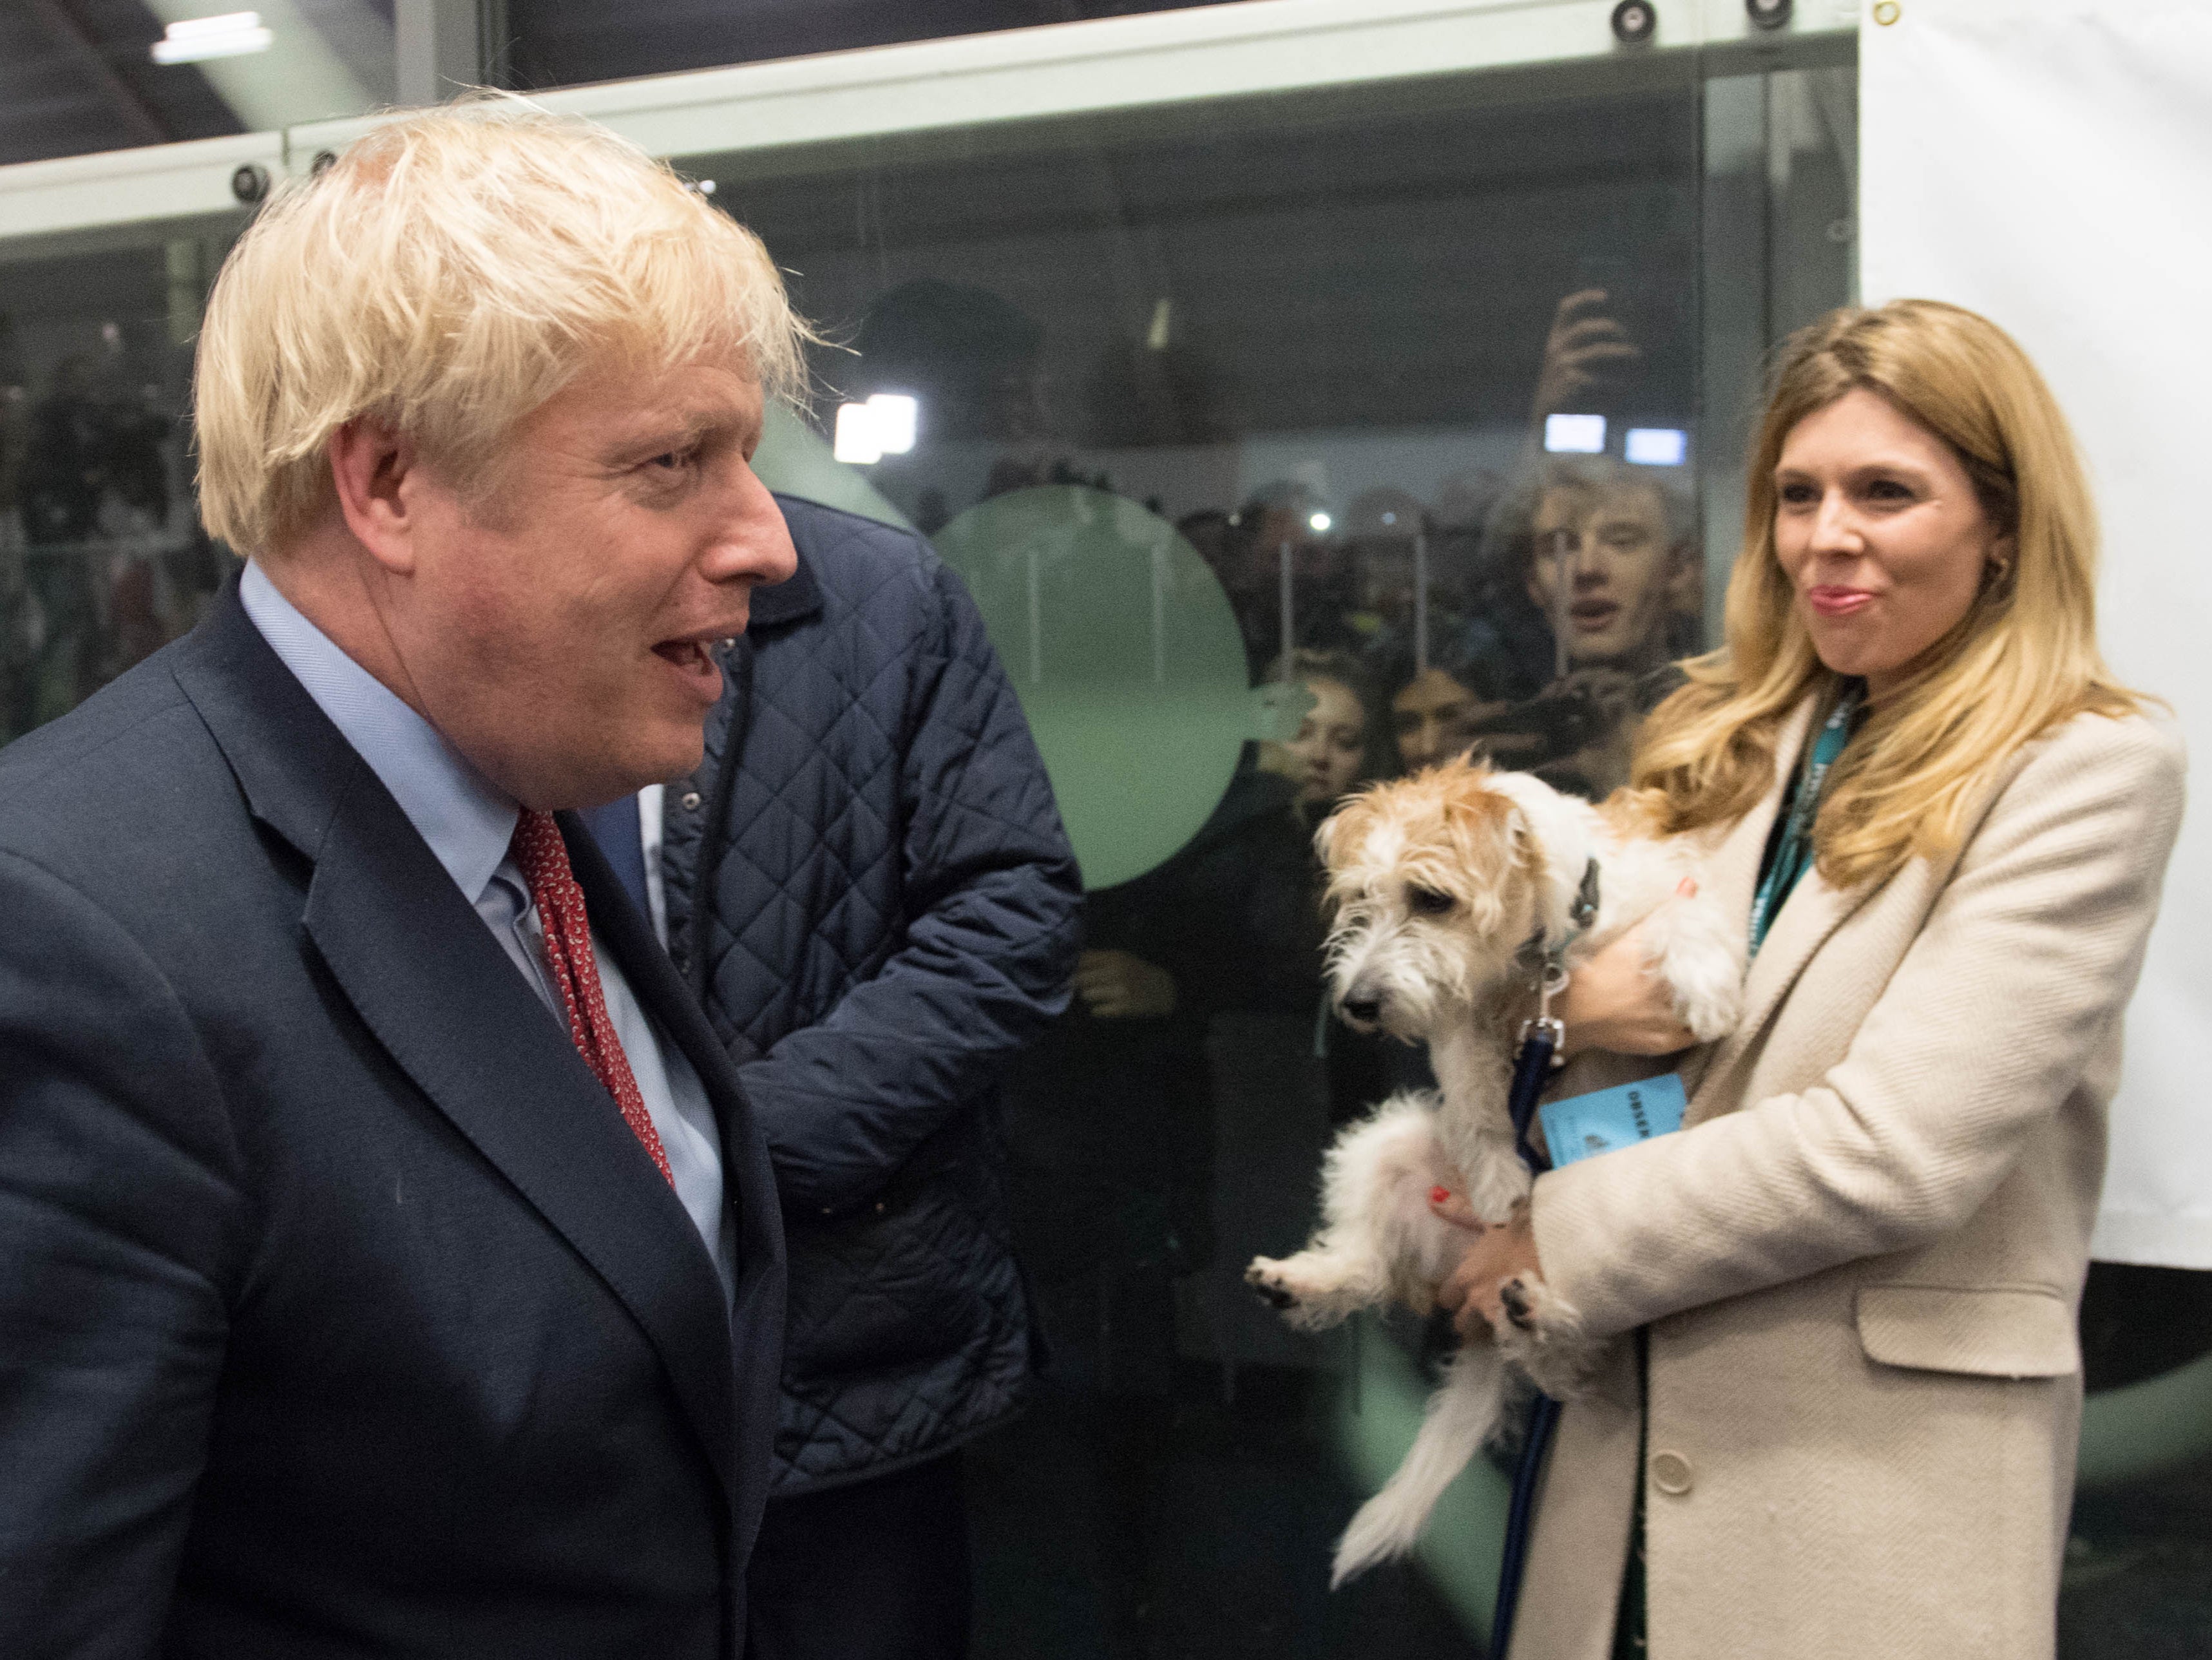 Boris Johnson with partner Carrie Symonds and dog Dilyn at the count in Johnson’s Uxbridge constituency during the 2019 general election